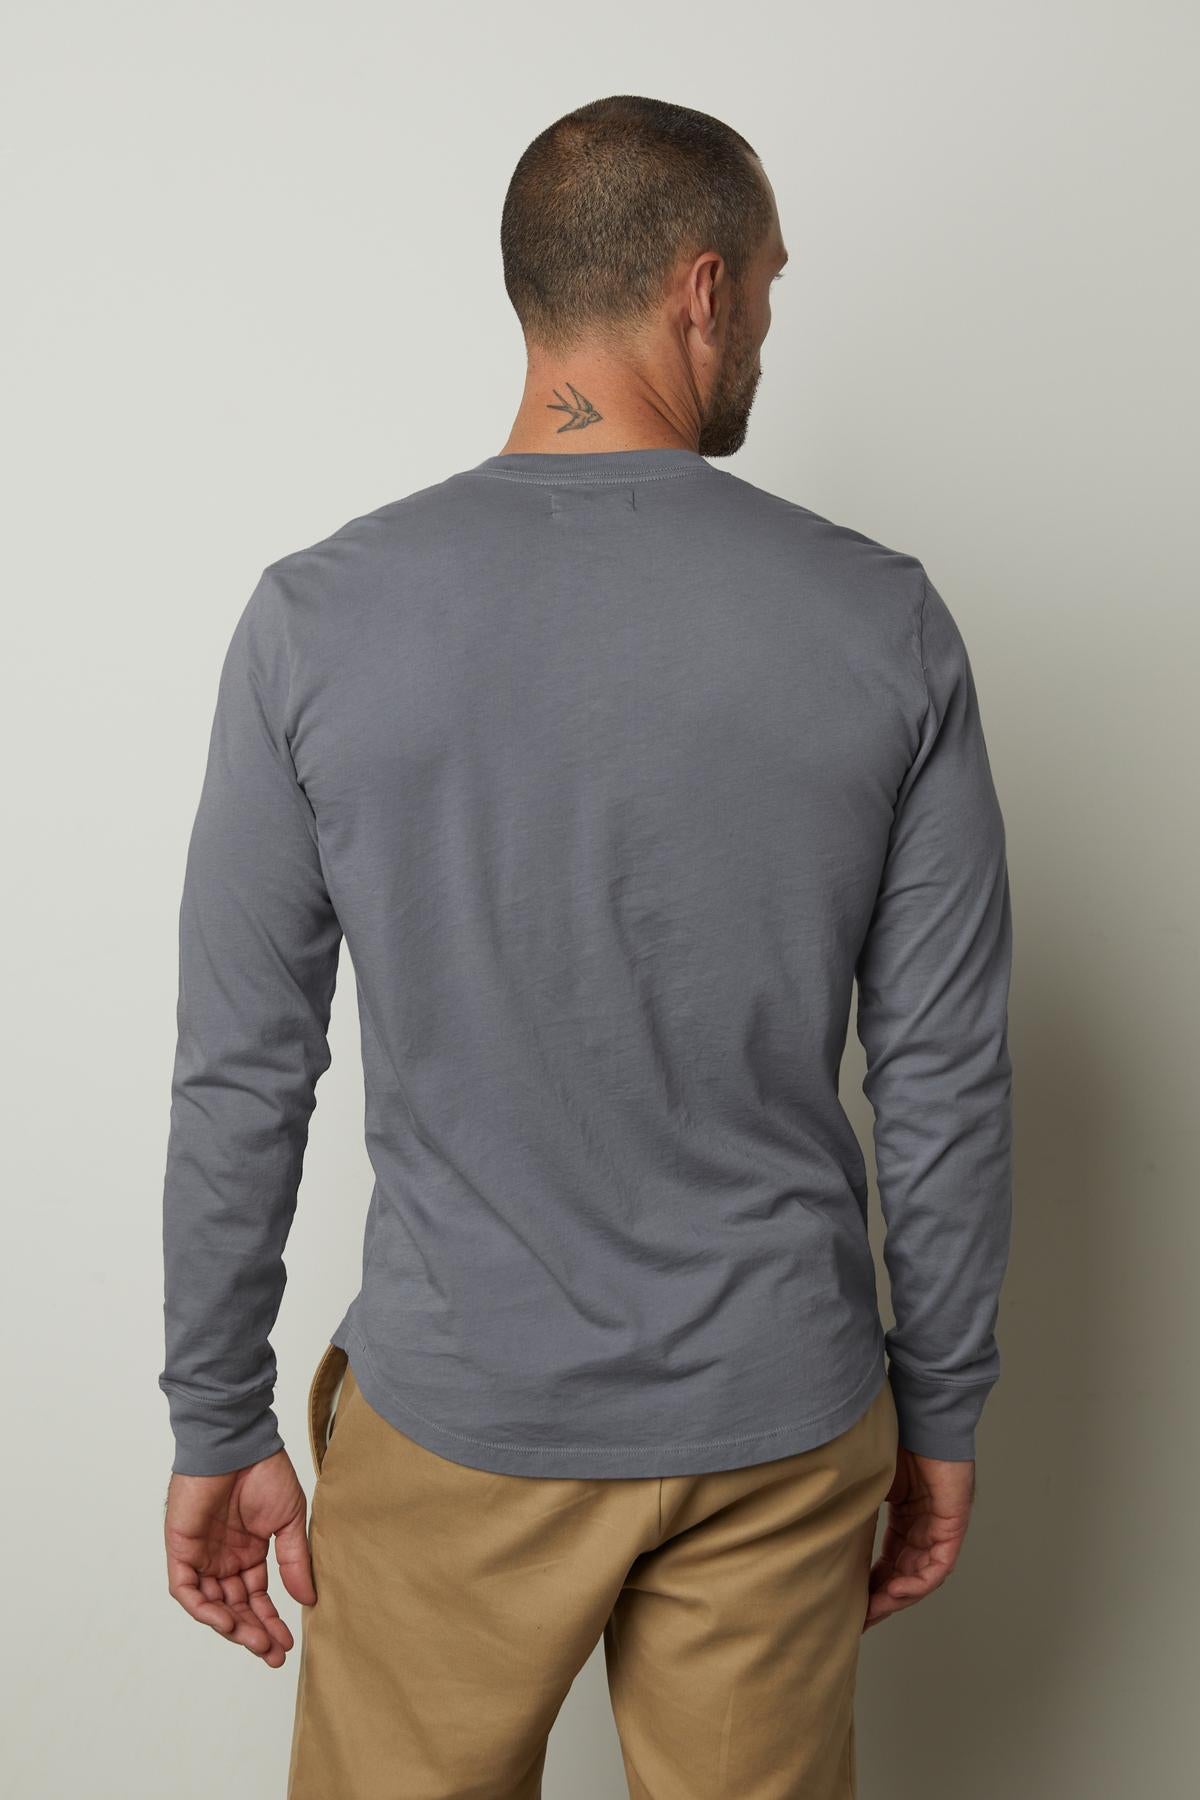 The back view of a man in a Grey BRADEN HENLEY shirt made of cotton fabric by Velvet by Graham & Spencer.-35782157697217